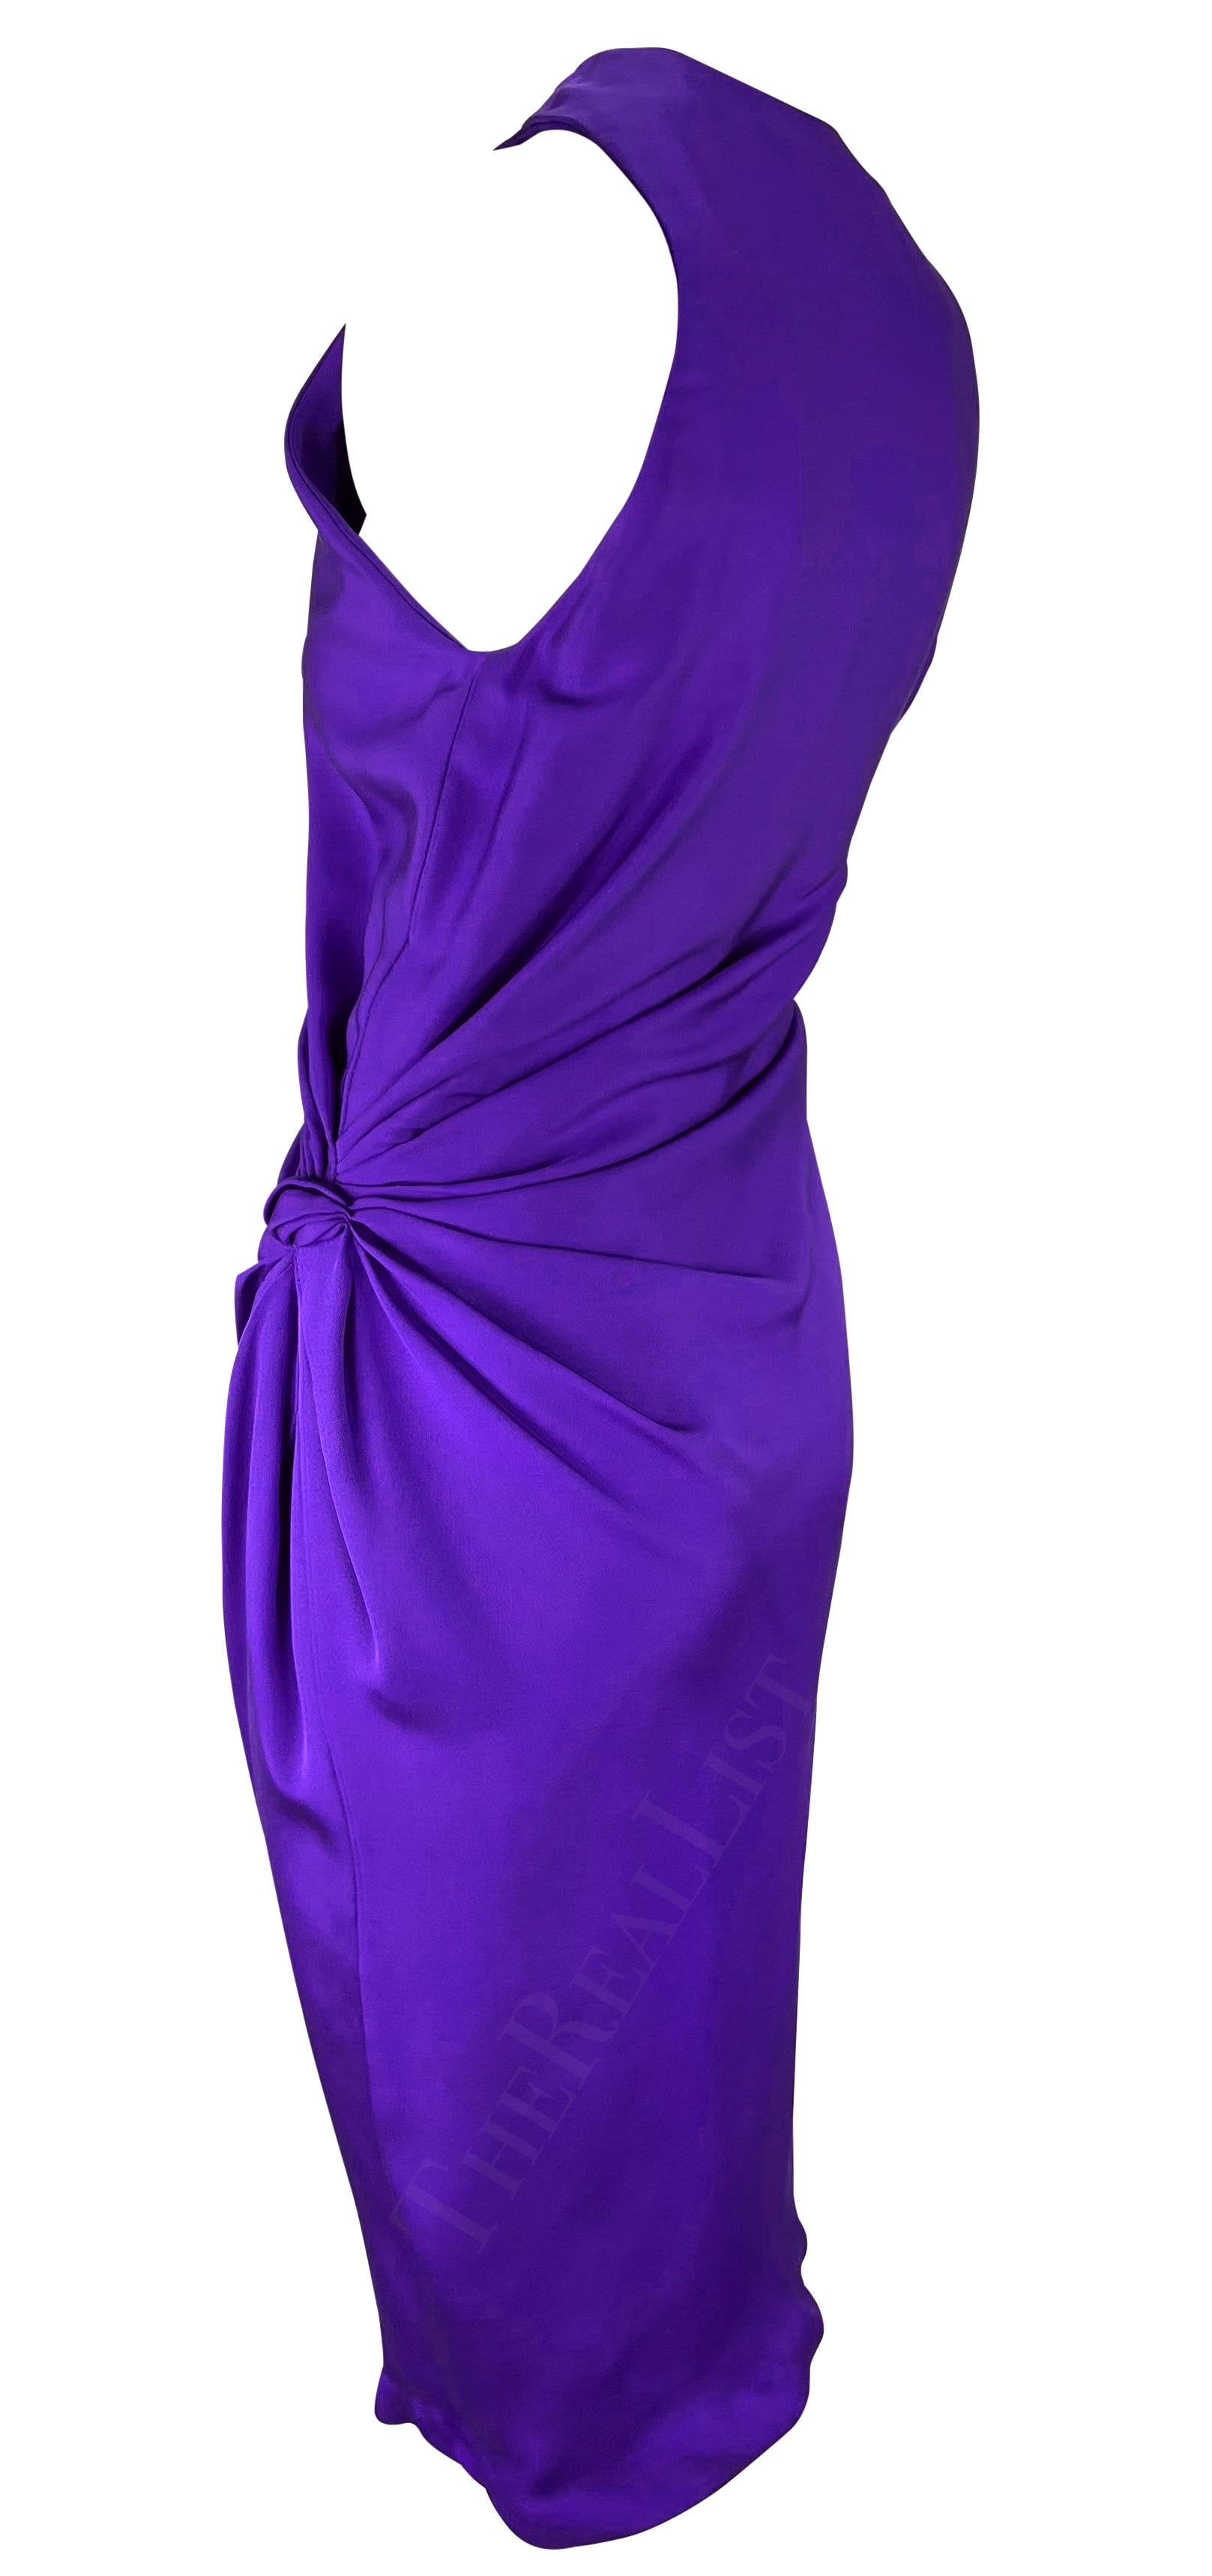 Women's or Men's S/S 1991 Gianni Versace Purple Gathered Ruched Sleeveless Cocktail Dress For Sale